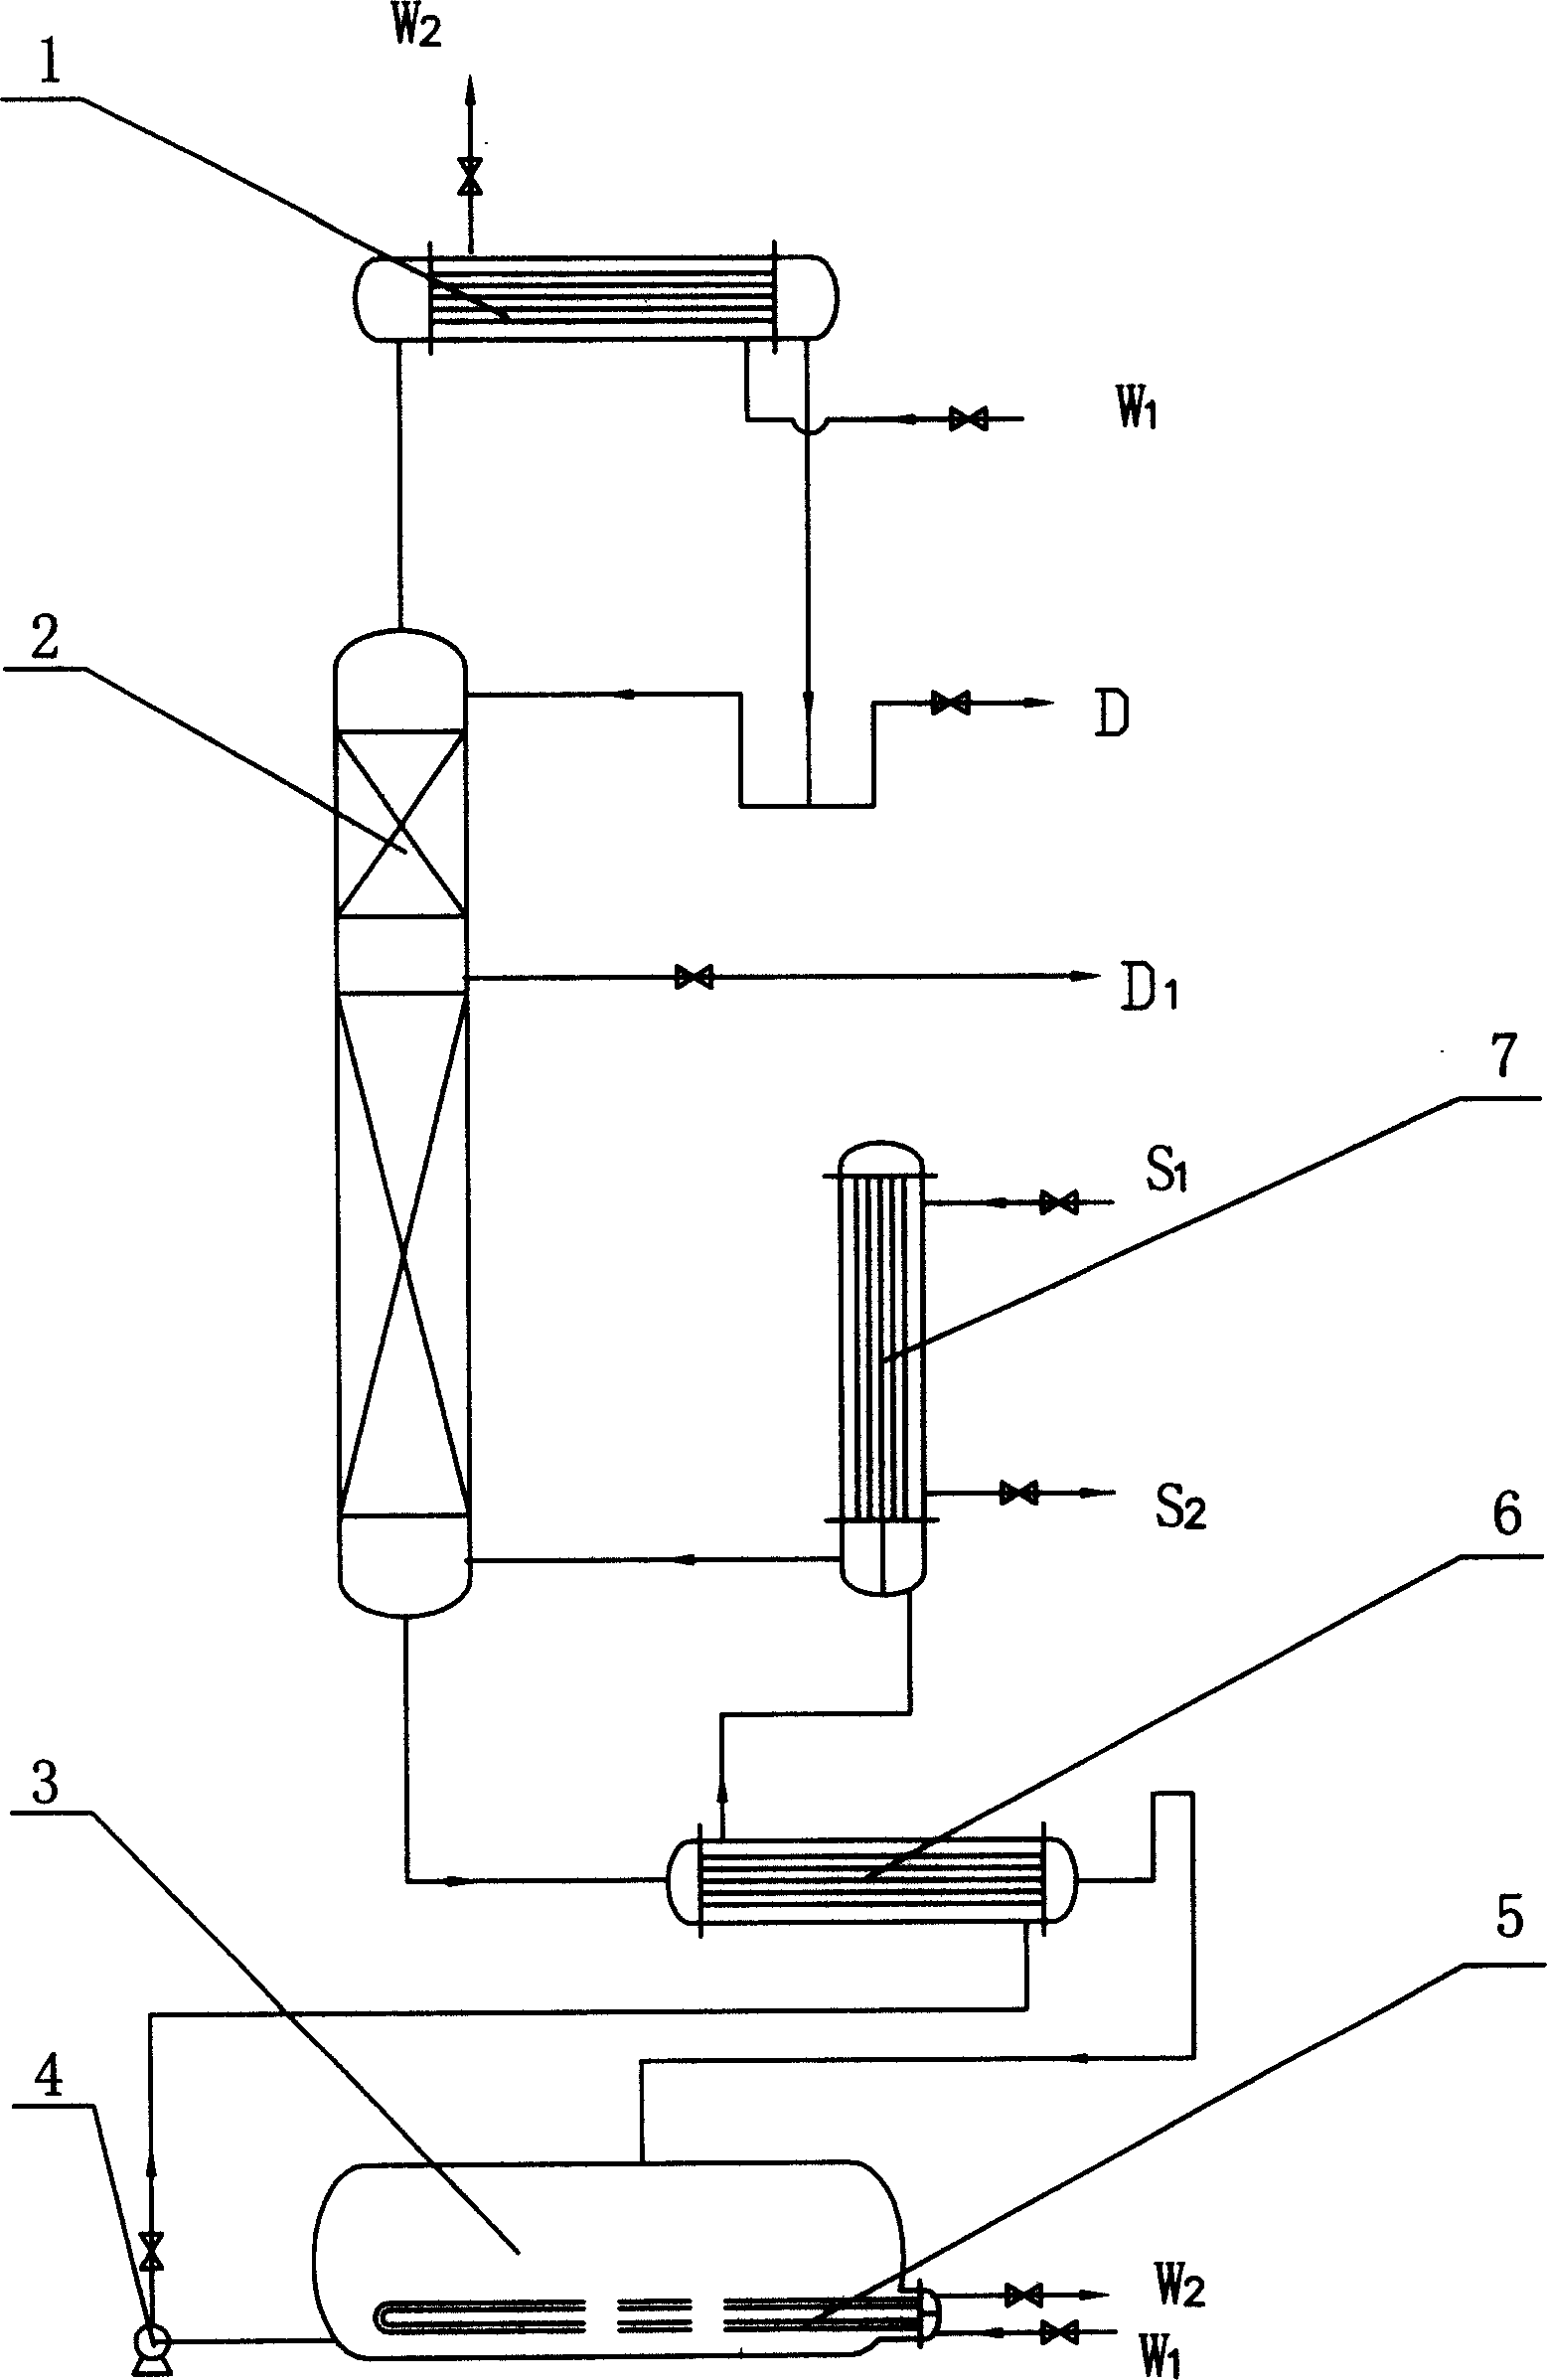 Thermosensitive material intermittent rectifying process having side material output and tower kettle cold material storage